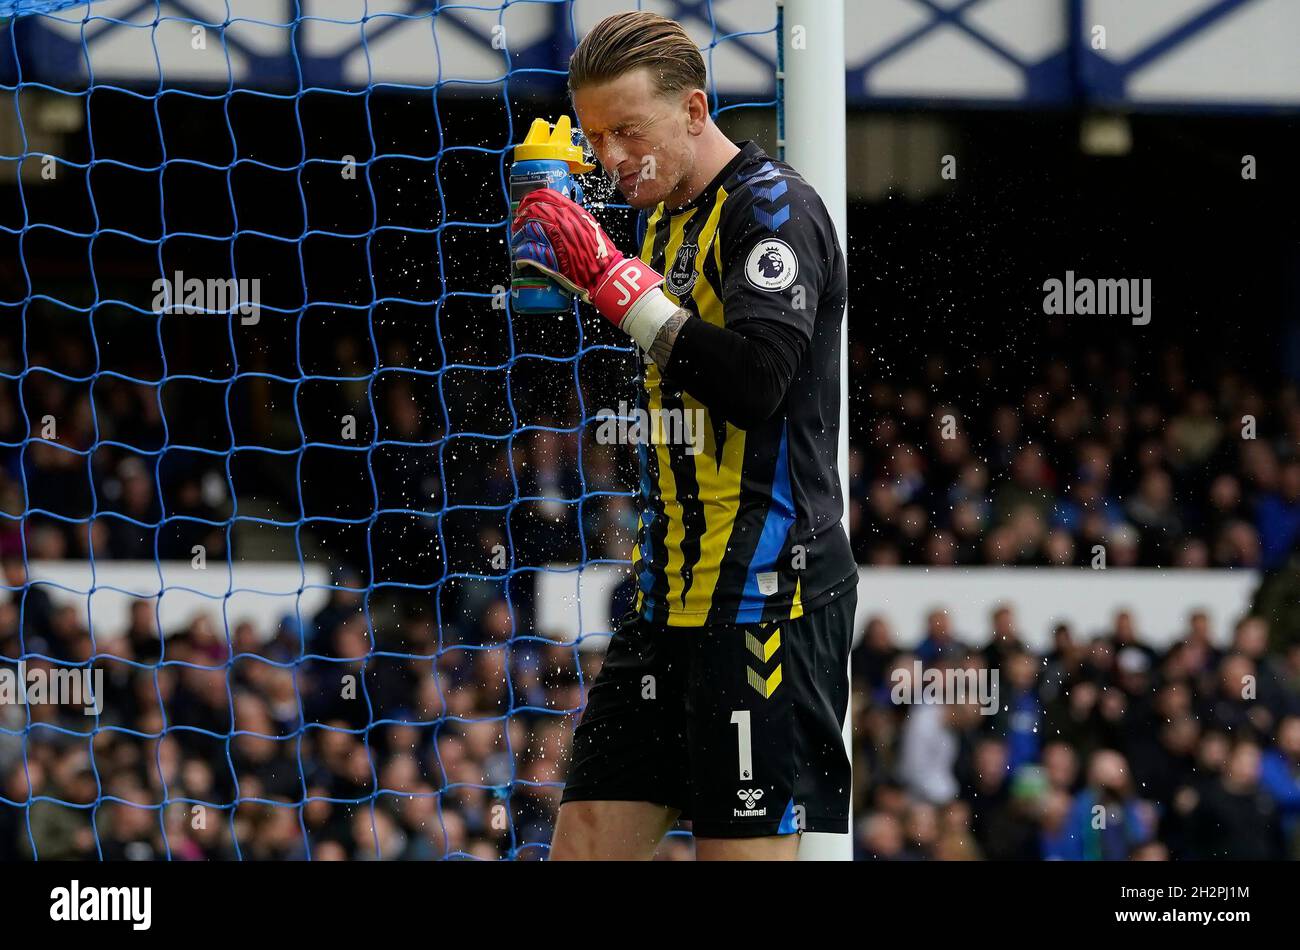 Liverpool, England, 23rd October 2021. Jordan Pickford of Everton squirts water on his face during the Premier League match at Goodison Park, Liverpool. Picture credit should read: Andrew Yates / Sportimage Stock Photo